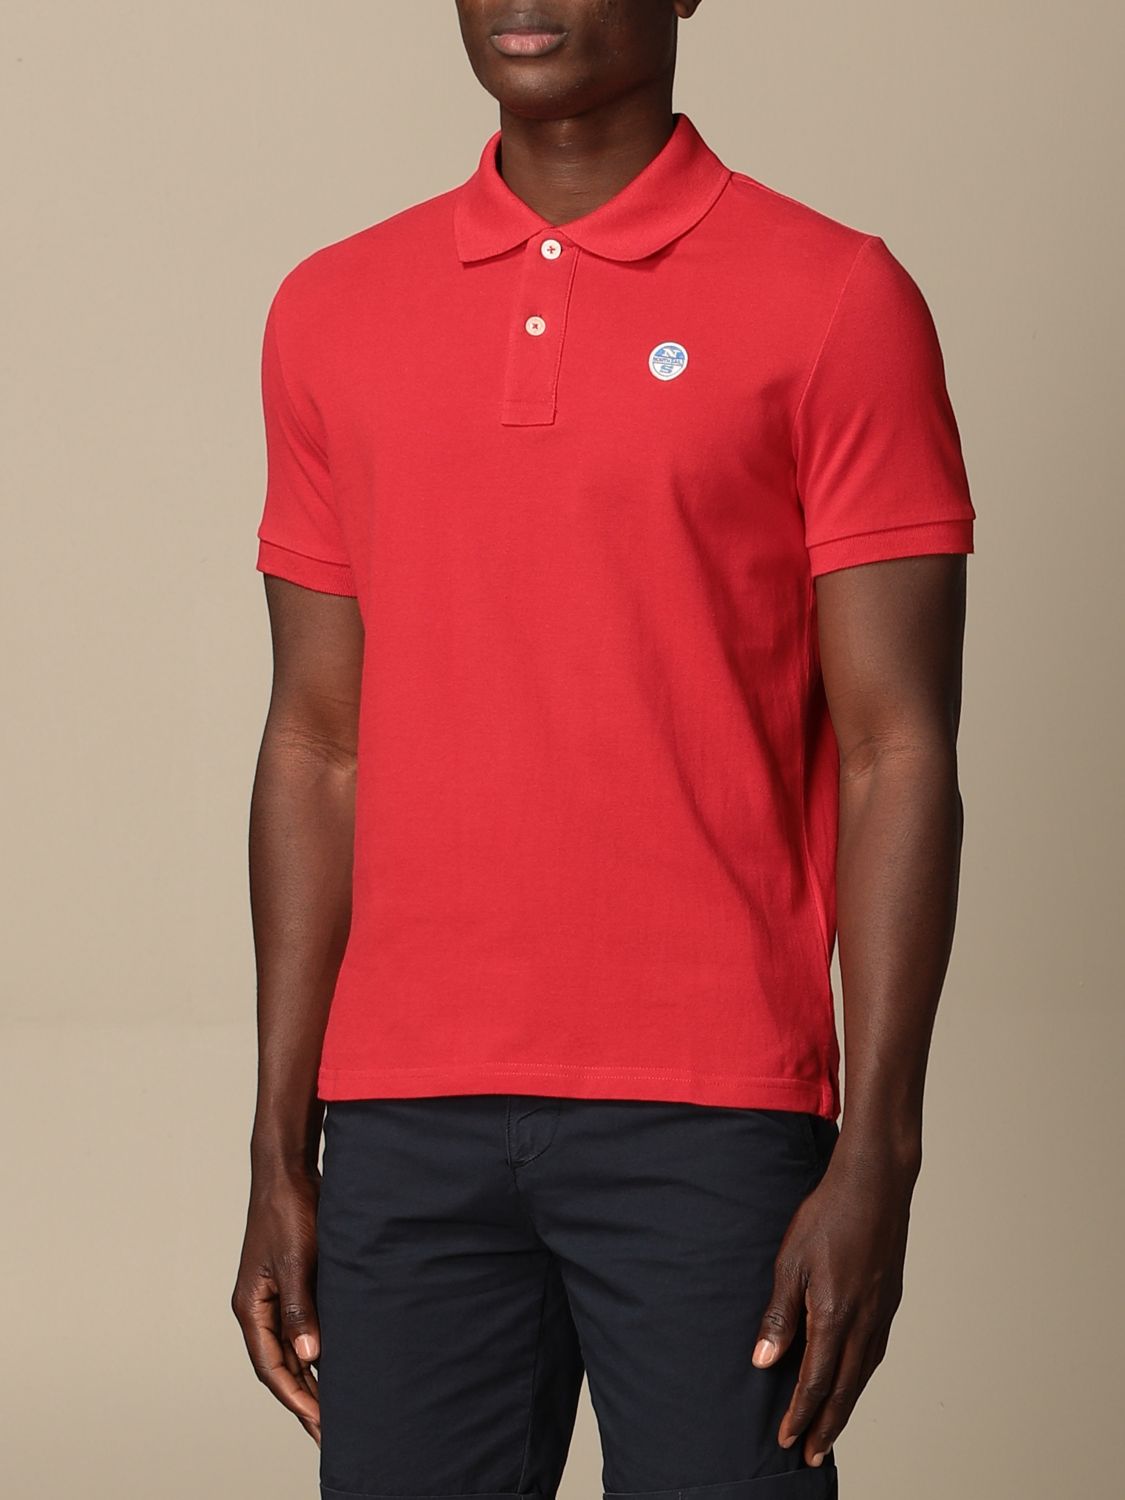 North Sails Outlet: polo shirt in cotton with logo - Red | North Sails polo shirt 692240 on GIGLIO.COM